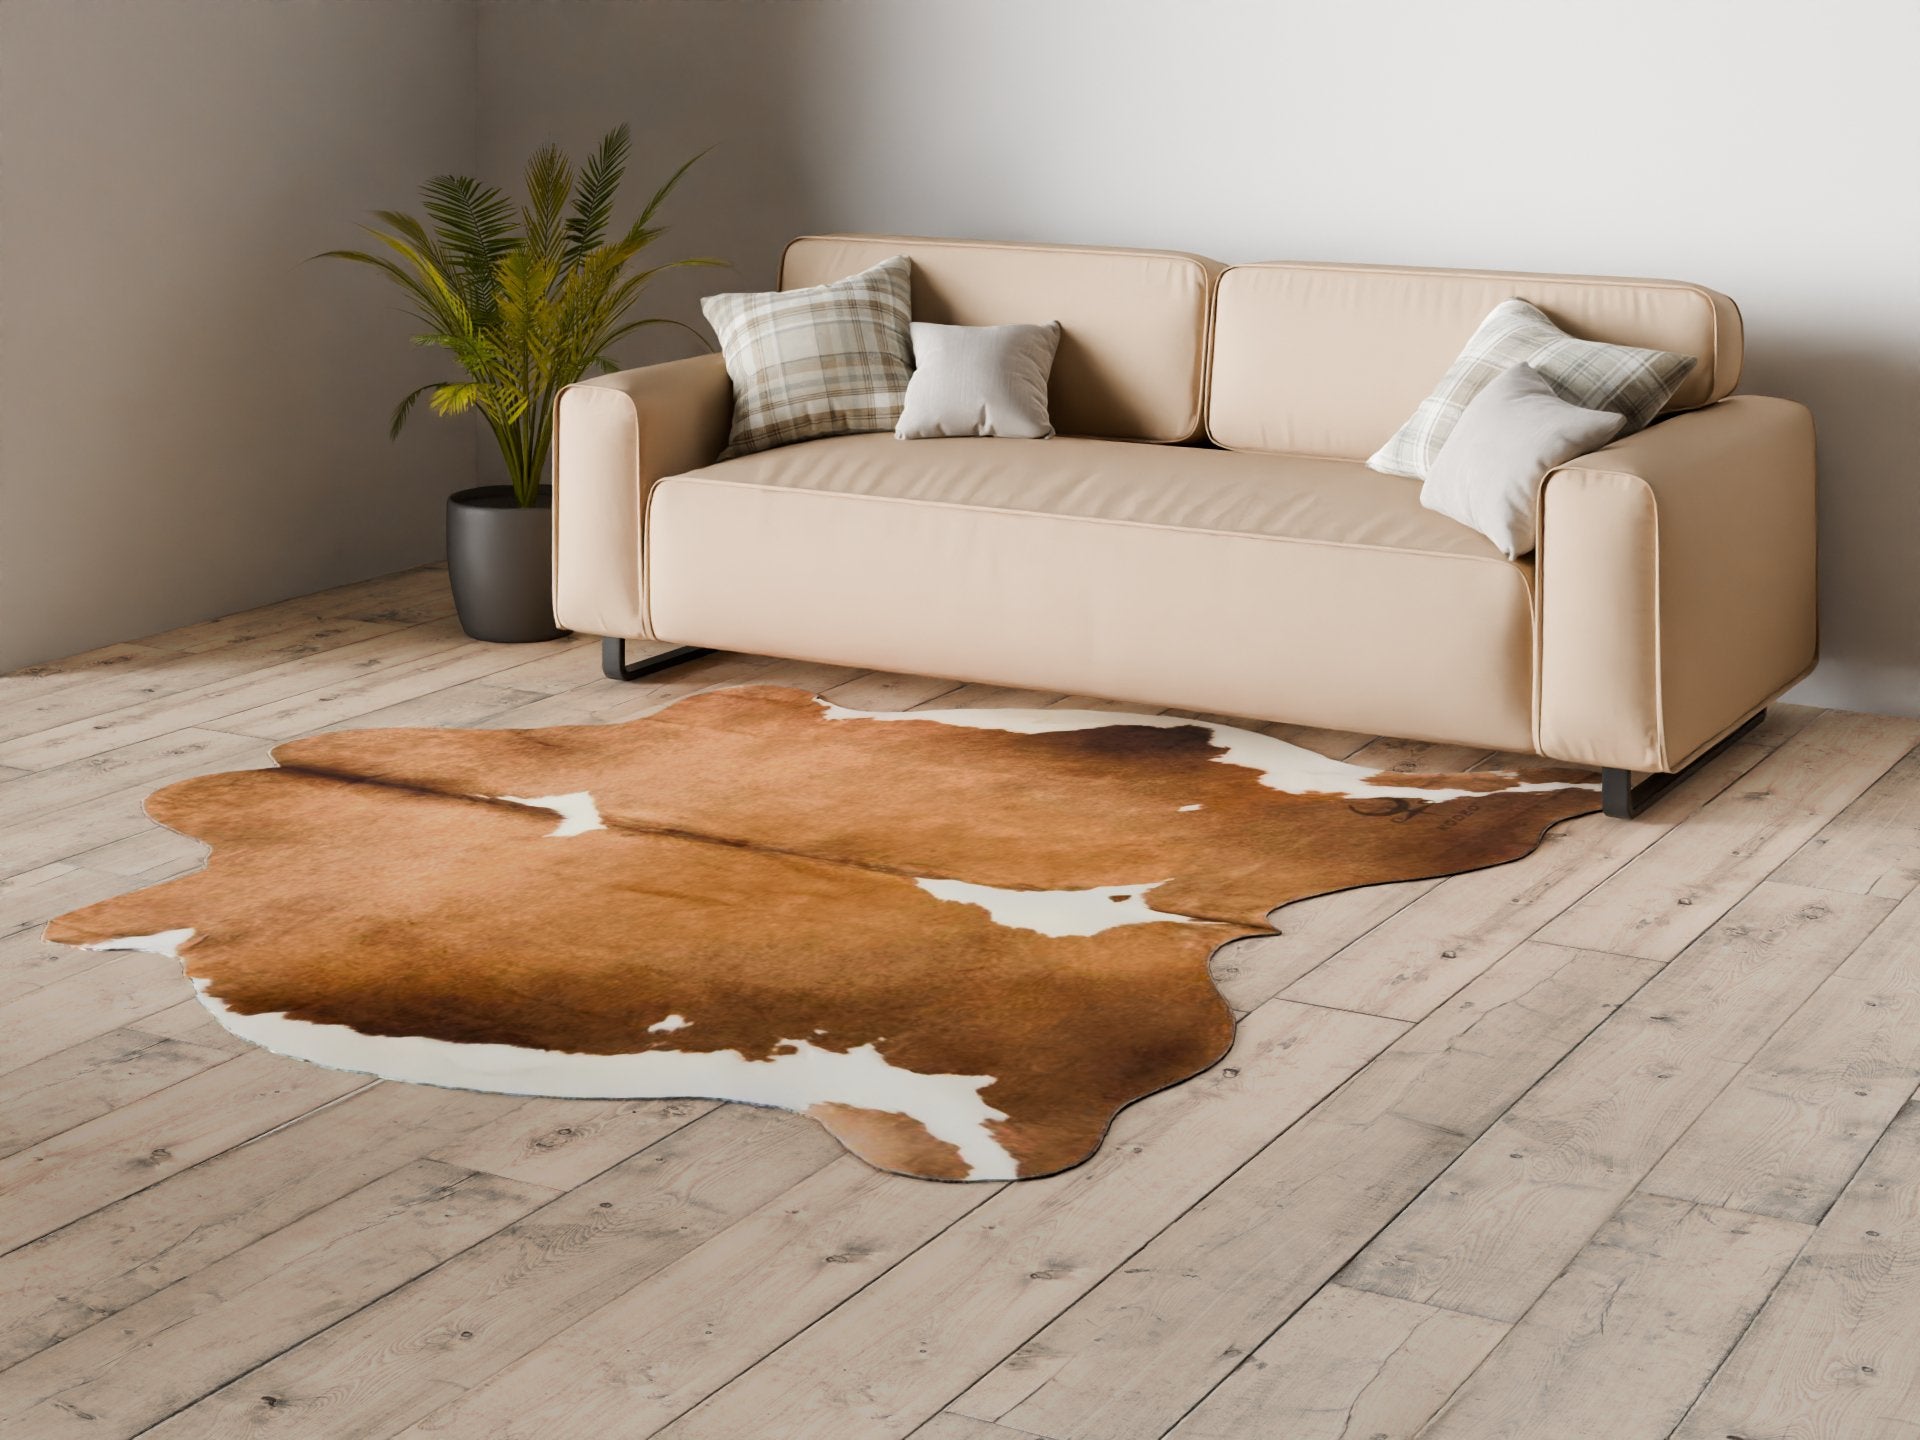 Extra Large Brown and White Cowhide Rug Size 8x7.2ft---4658 - Rodeo Cowhide Rugs